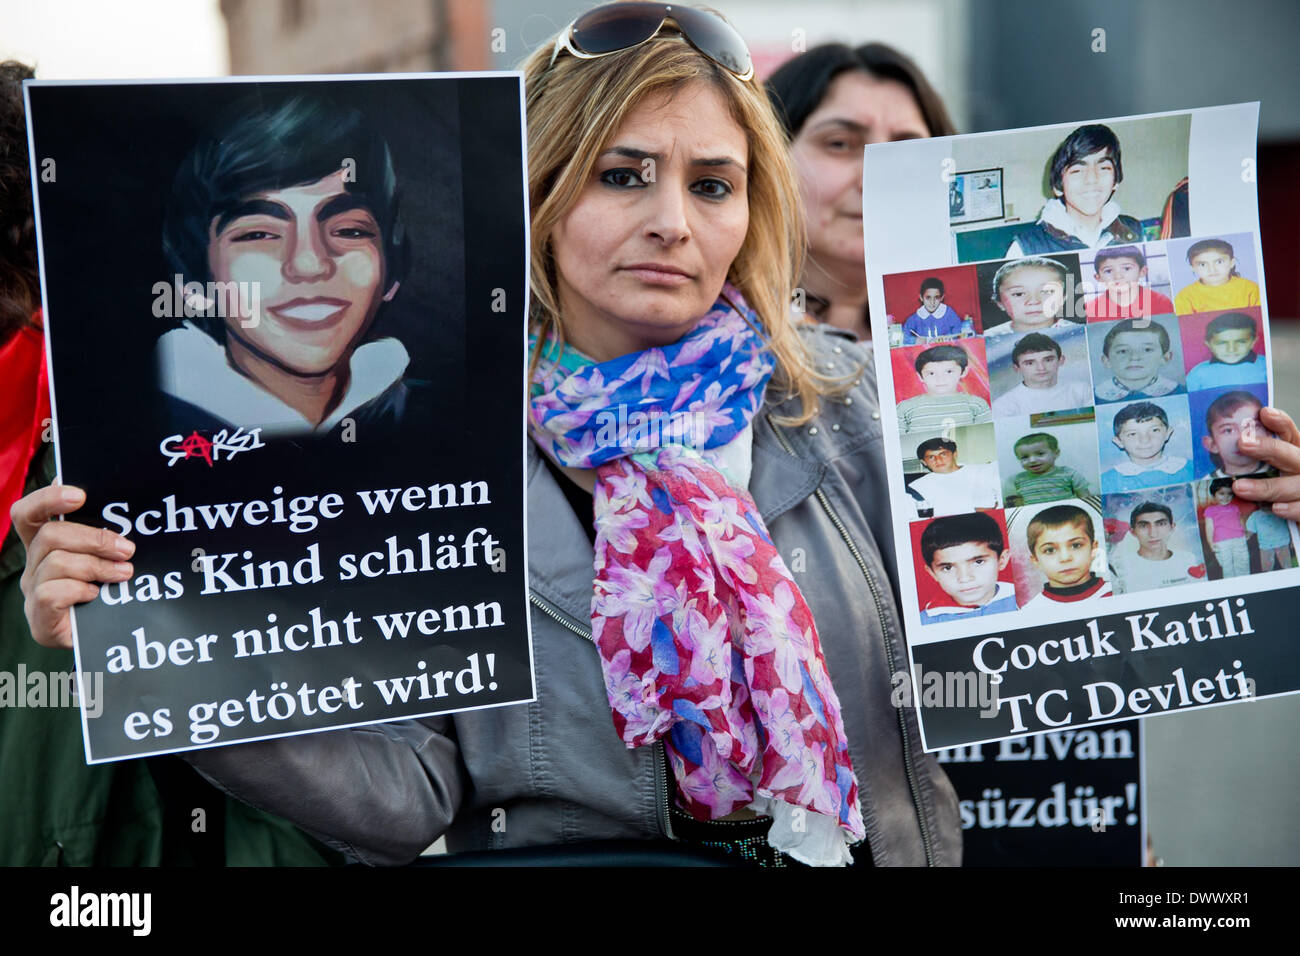 Nuremberg, Germany. 13th Mar, 2014. 'Schweige wenn das Kind schläft aber nicht wenn es getoetet wird' (lit. be quiet when a child is sleeping, not when he is being killed) is written on a poster during a protest in memory of the Berkin Elvan outside of the German-Turkish Film Festival in Nuremberg, Germany, 13 March 2014. The 15 year old was hit in the head by a police tear-gas canister during a demonstration against the Islamic conservative government in Istanbul. He died after spending 269 days in a coma. Photo: Daniel Karmann/dpa/Alamy Live News Stock Photo